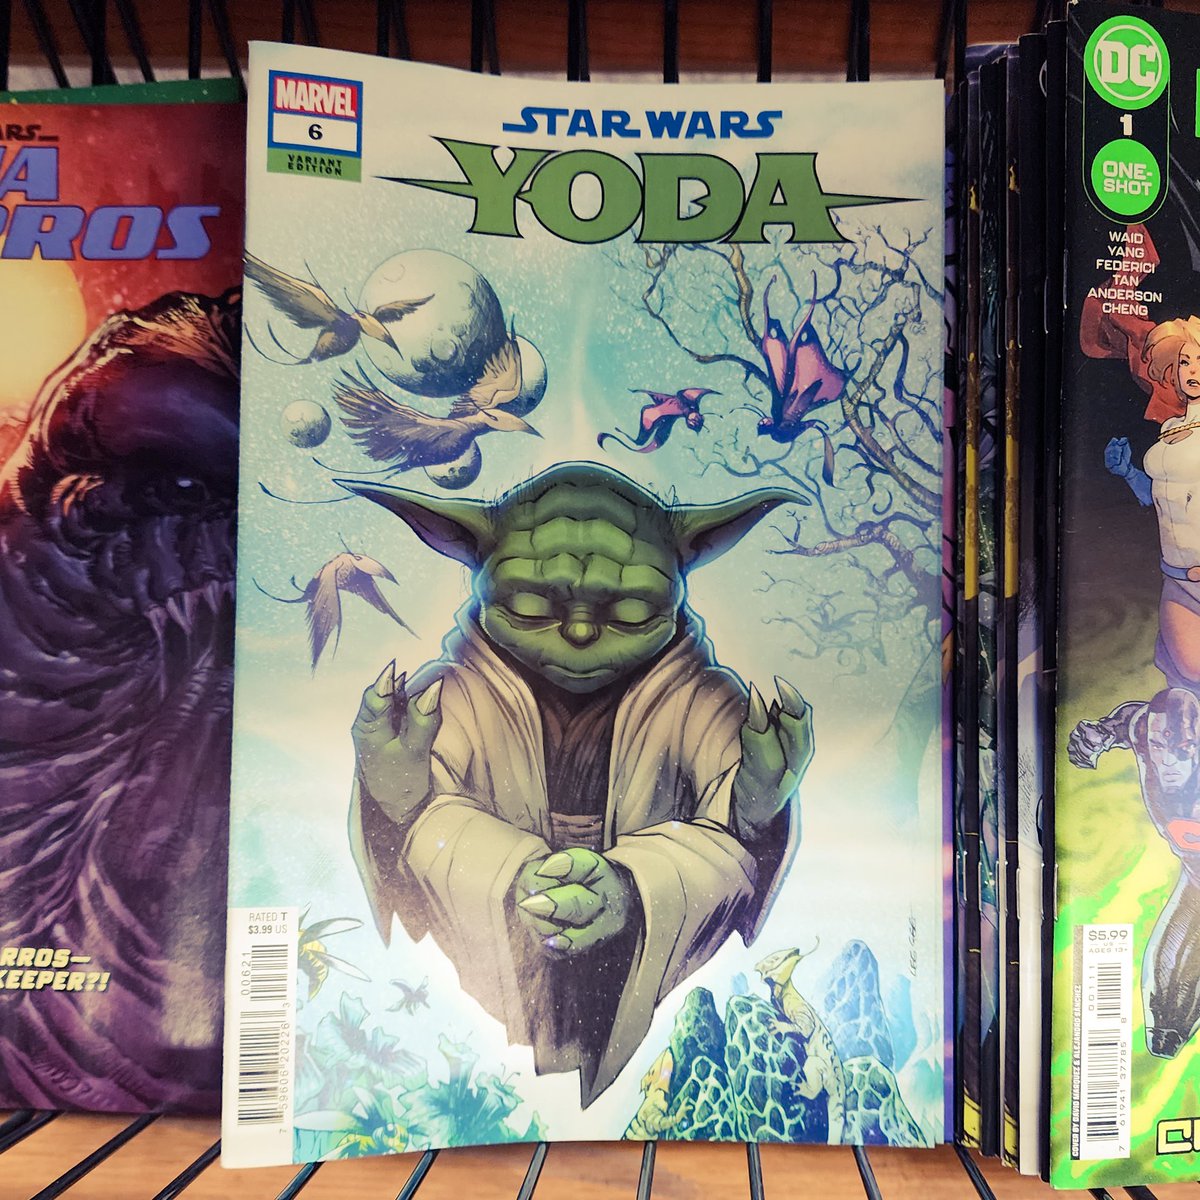 Happy #NewComicBookDay! In comic skips now is Star Wars: Yoda #6, the conclusion of our story arc. Written by myself, art by @LukeRossArt, colors by @nwoodard. Loved working on this story, especially since it meant reuniting Team Thrawn 😁💙 #NCBD #StarWars #Yoda